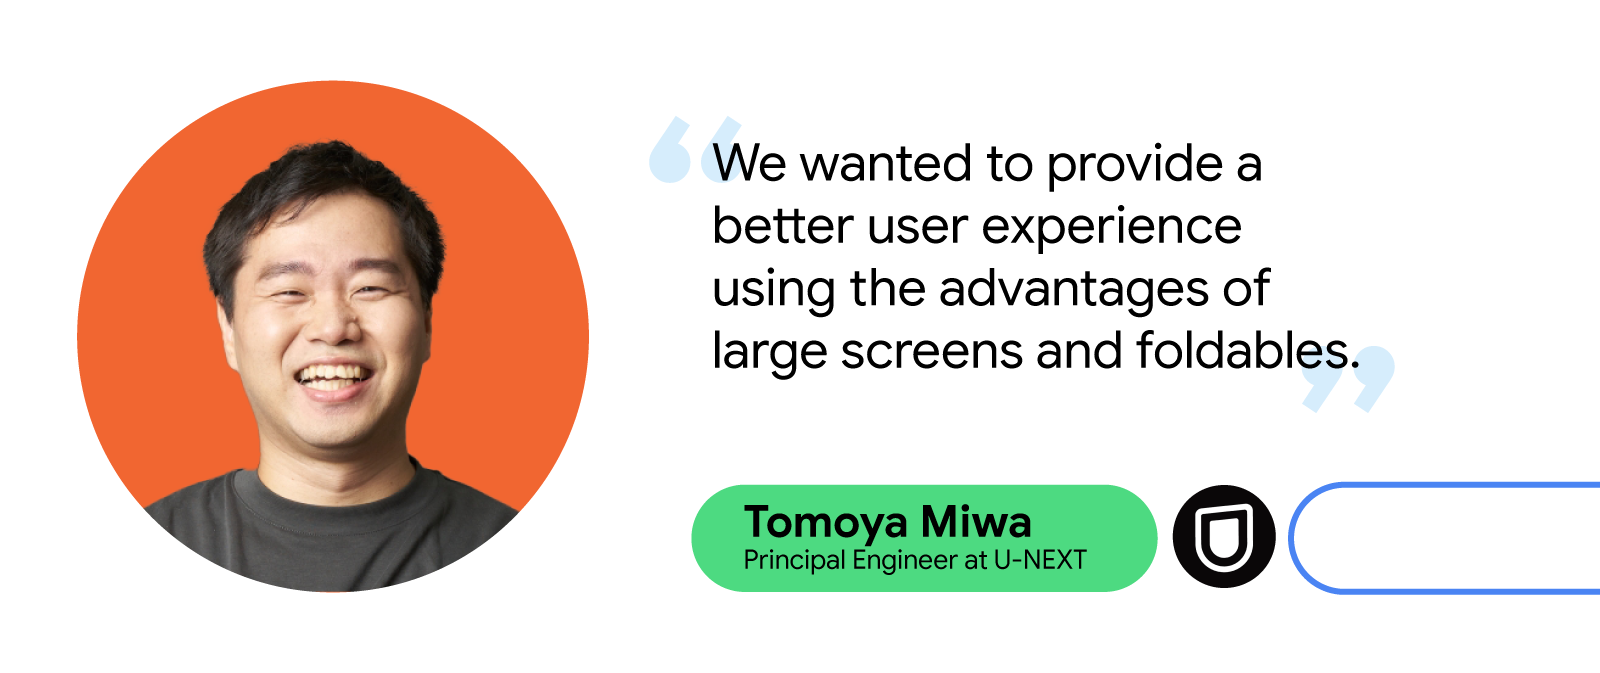 Headshot of Tomoya Miwa, Principal engineer at U-NEXT, smiling, with text quote 'We wanted to provide a better user experience using the advantages of large screens and foldables'